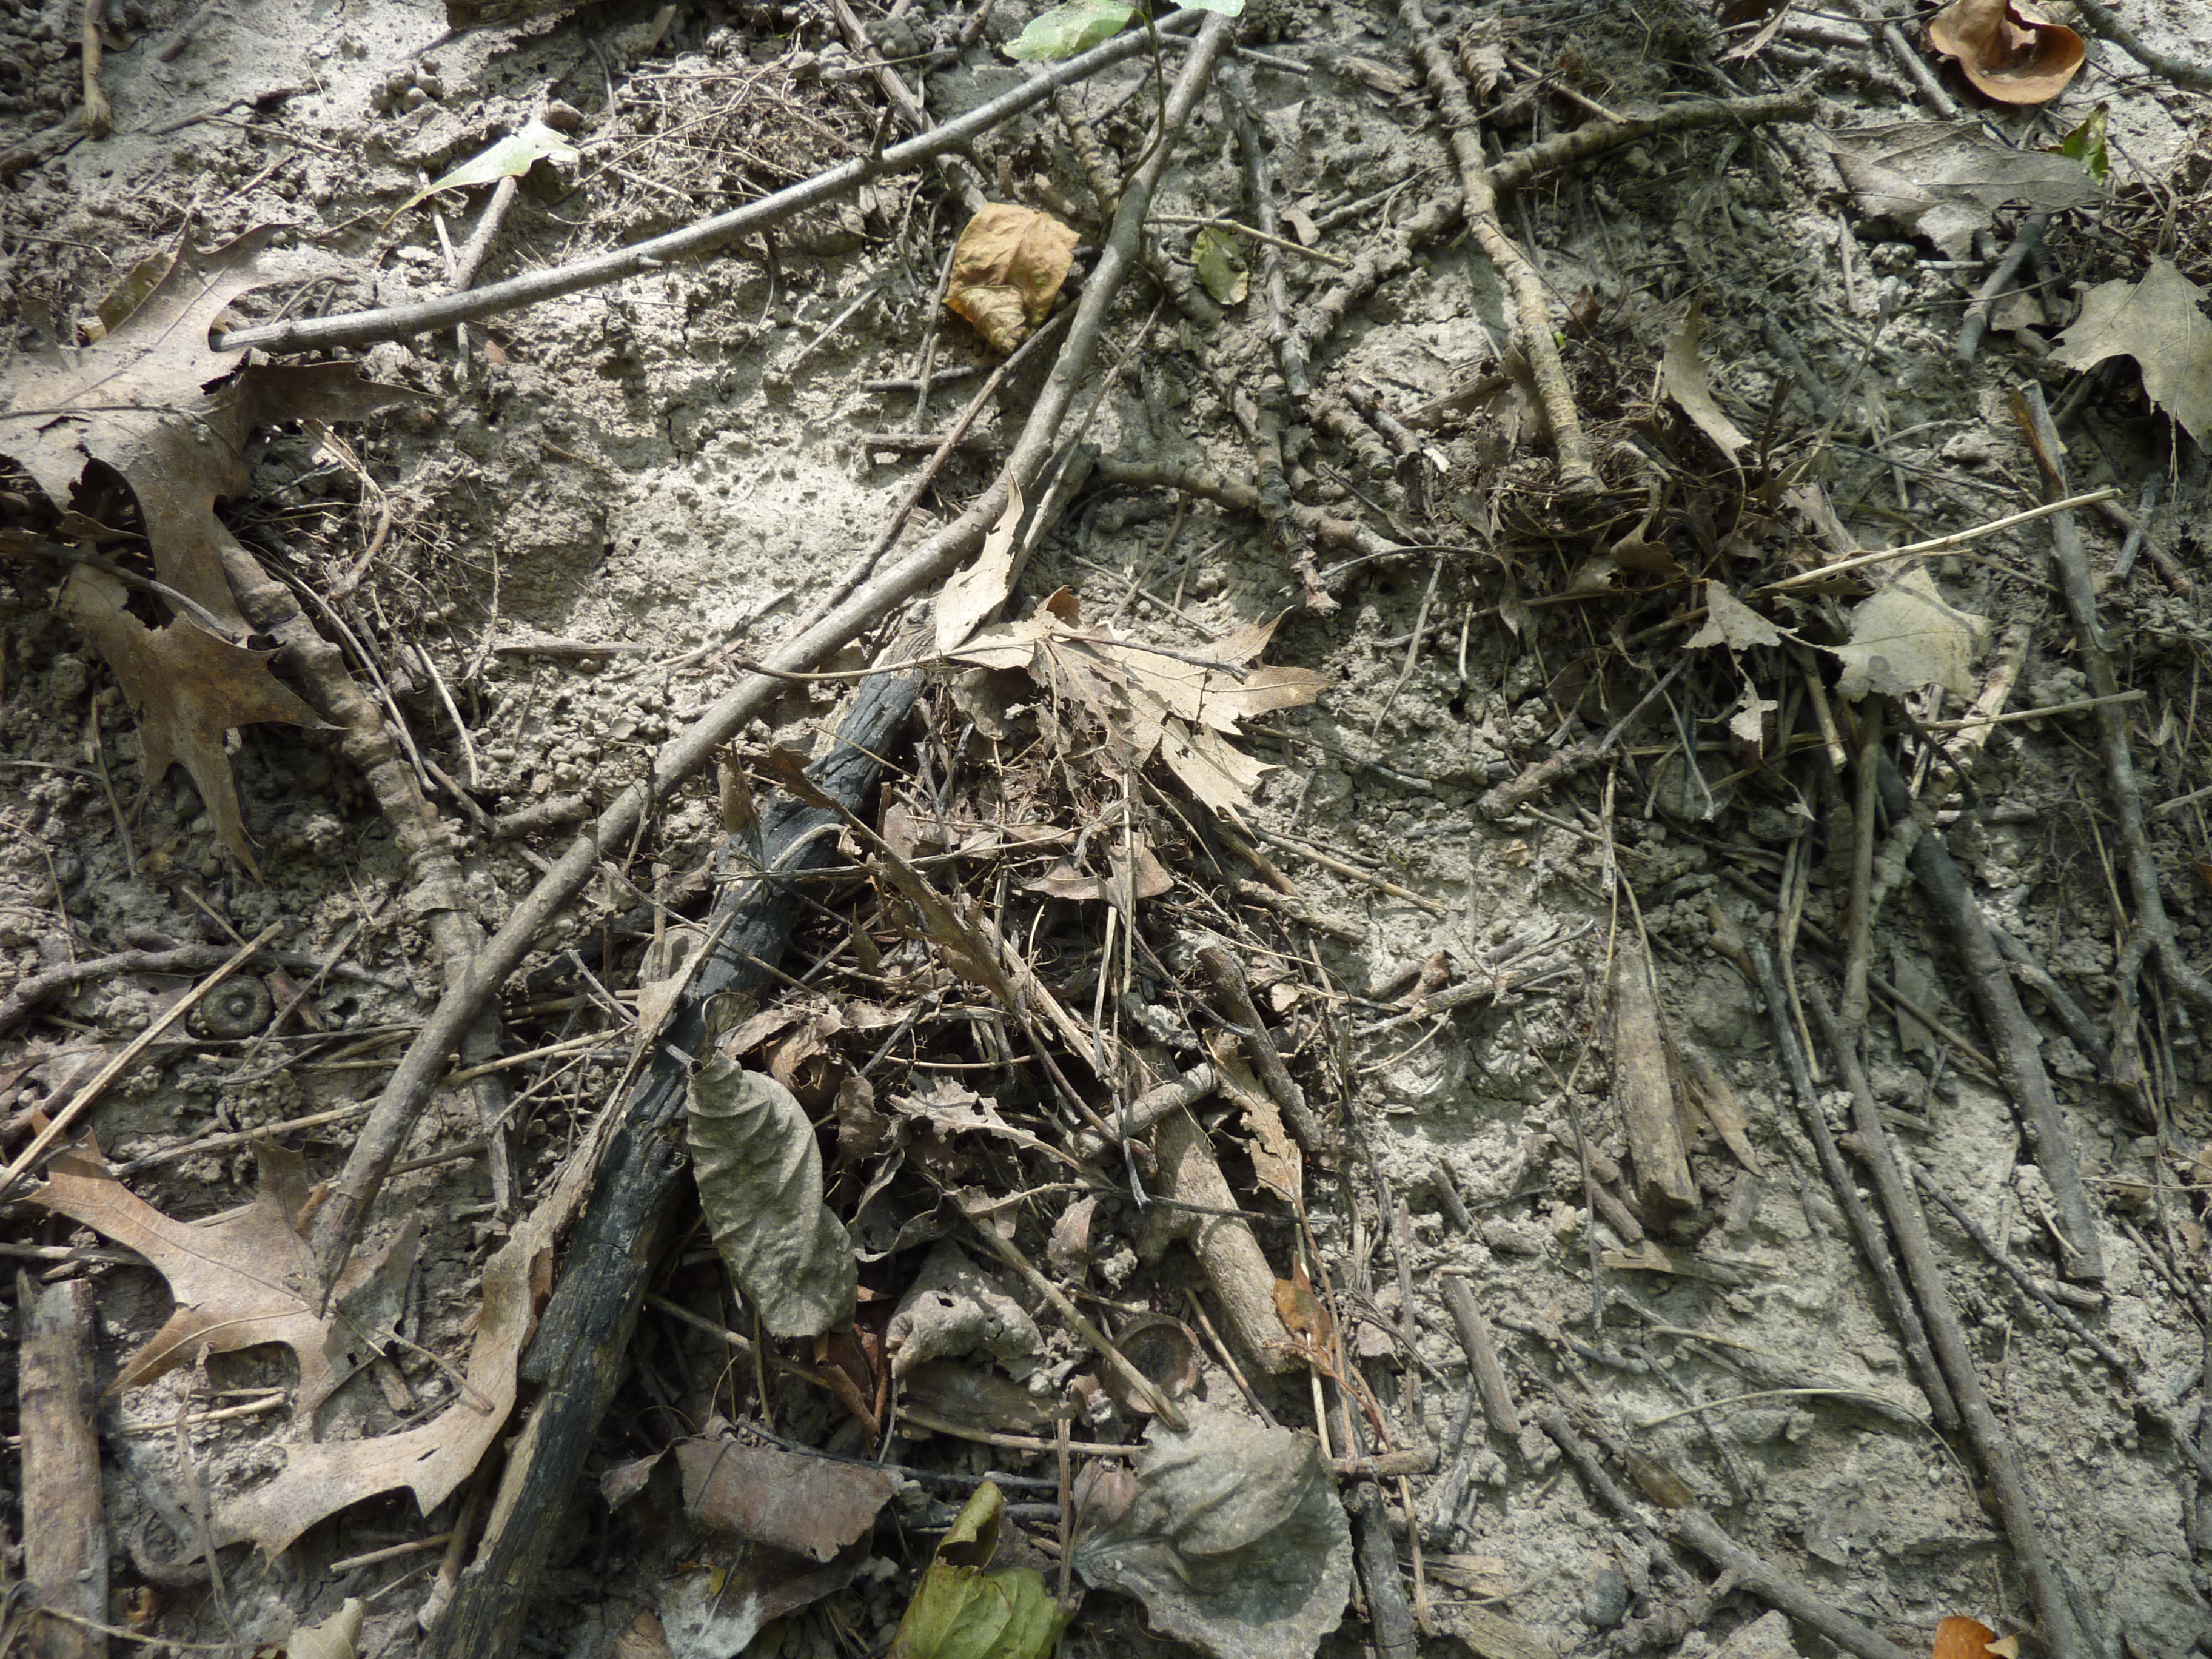 Earthworms invade our forest floor